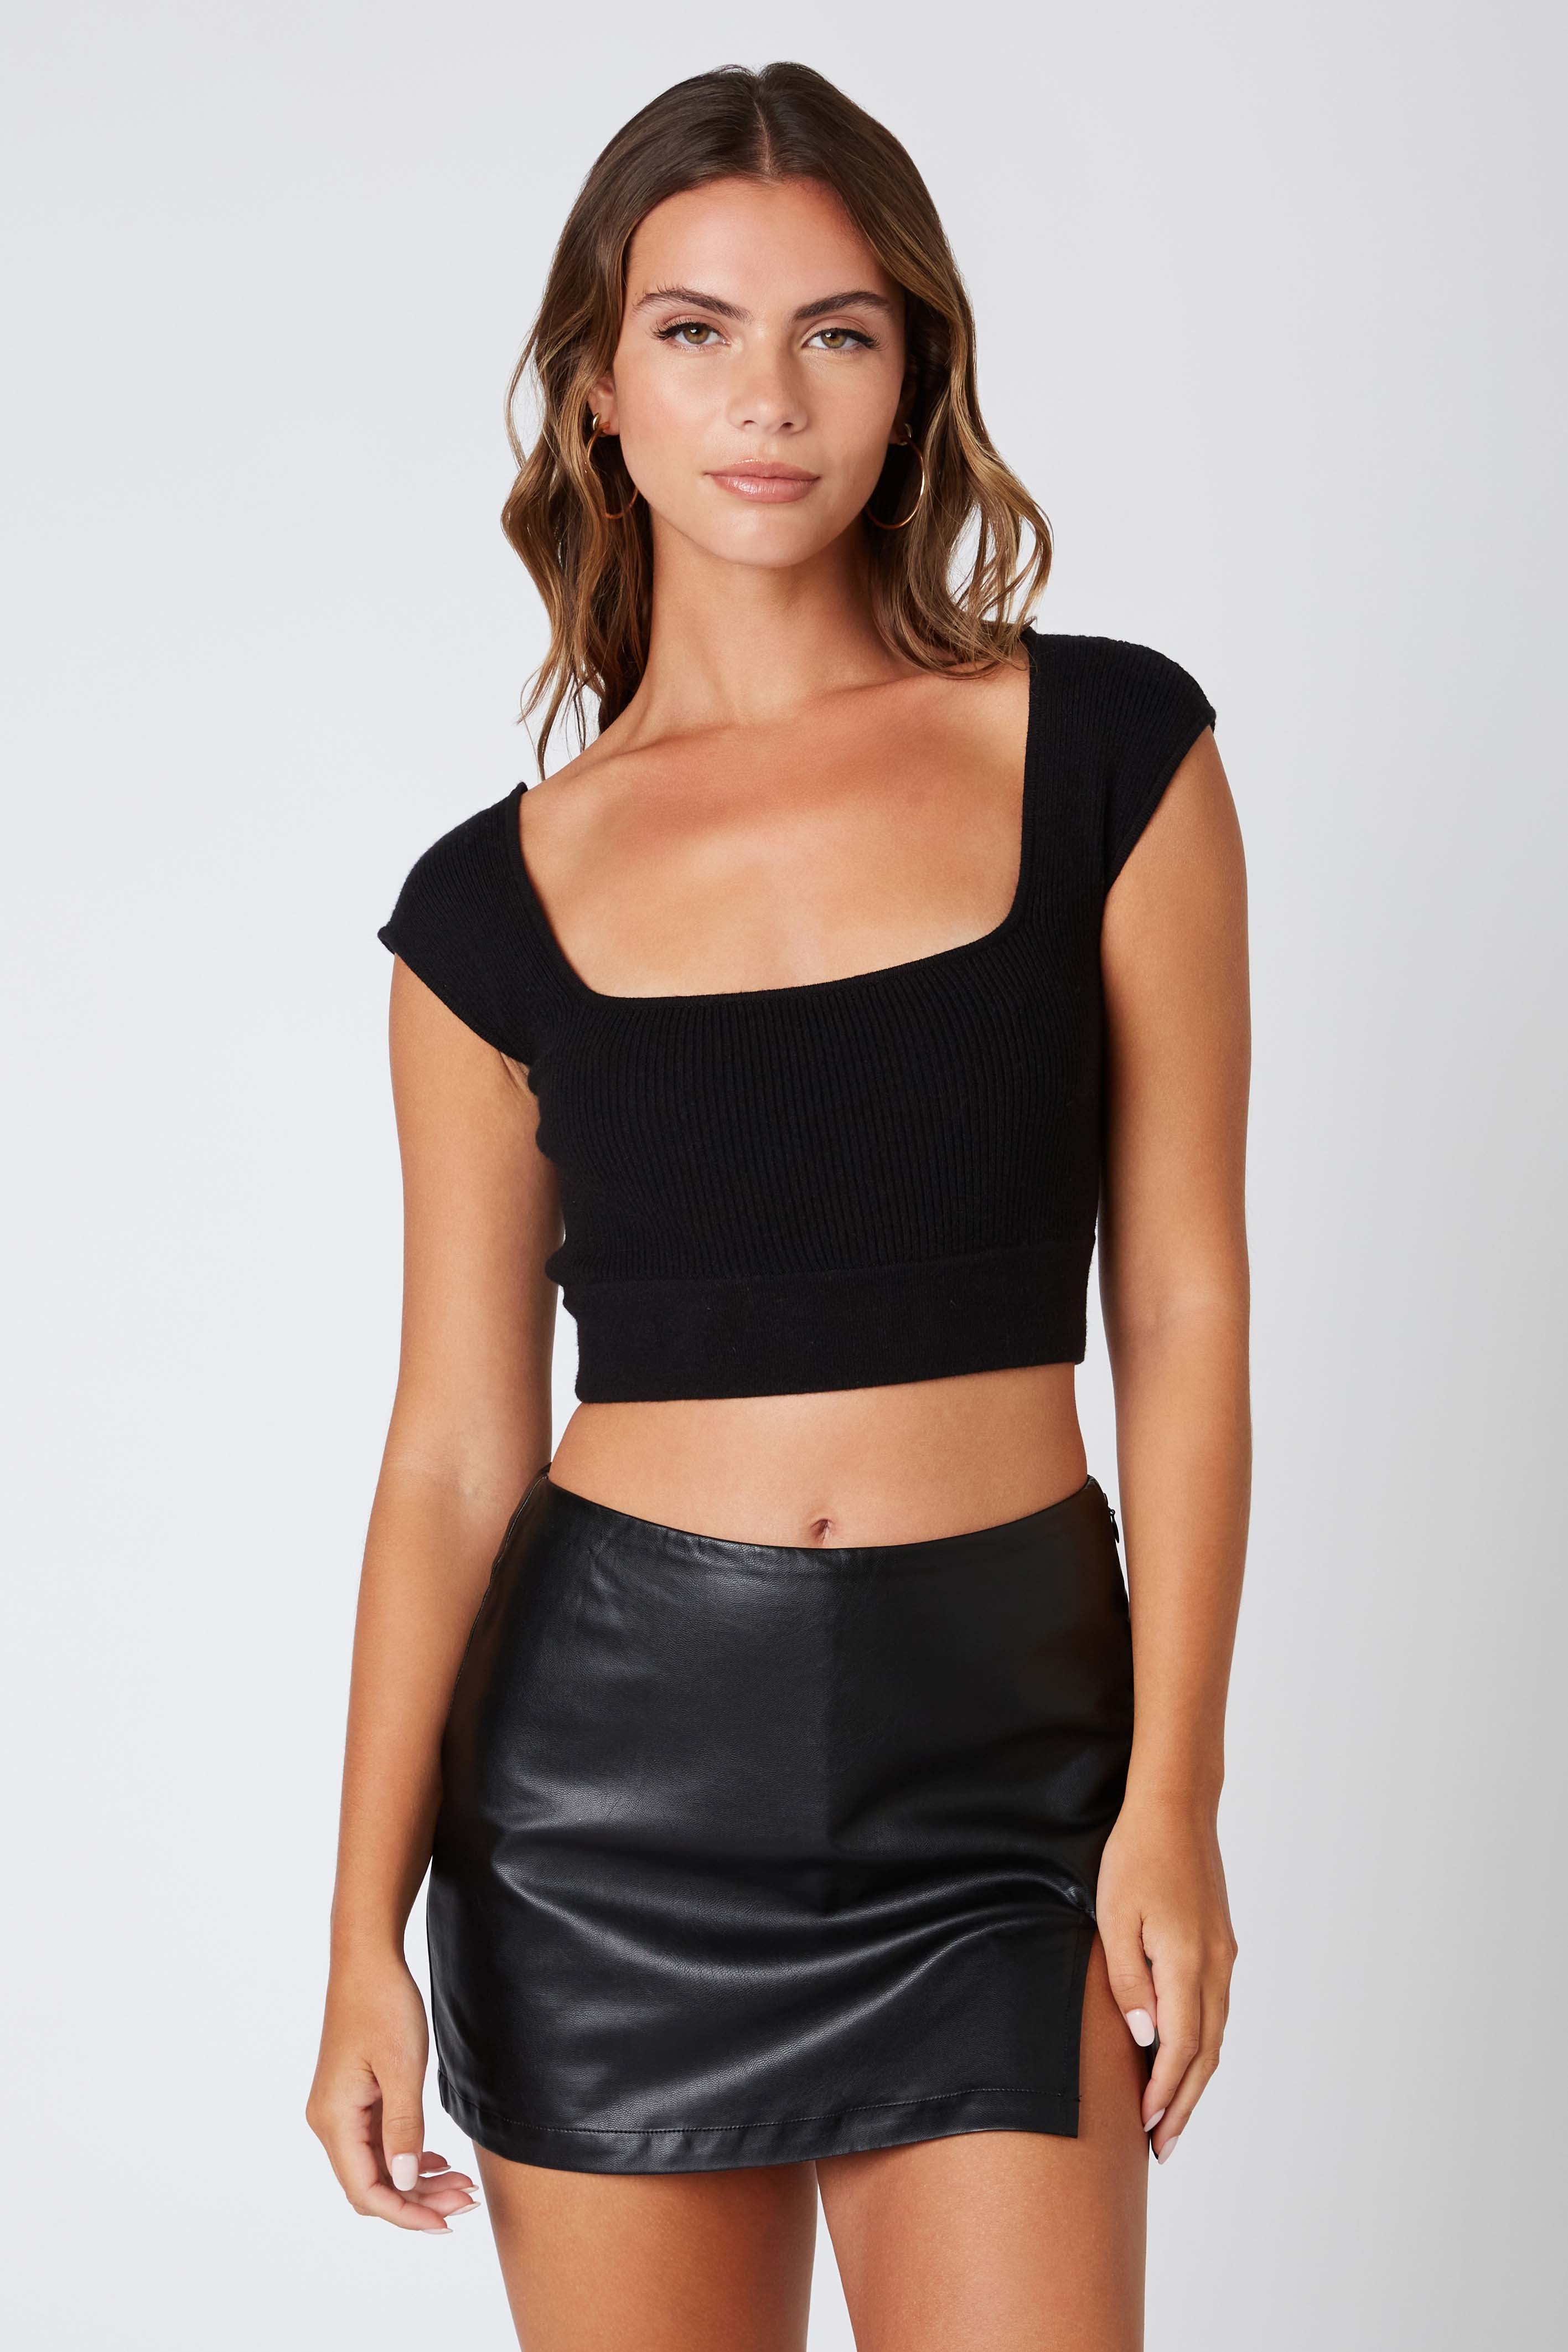 Square Neck Crop Top in Black Front View